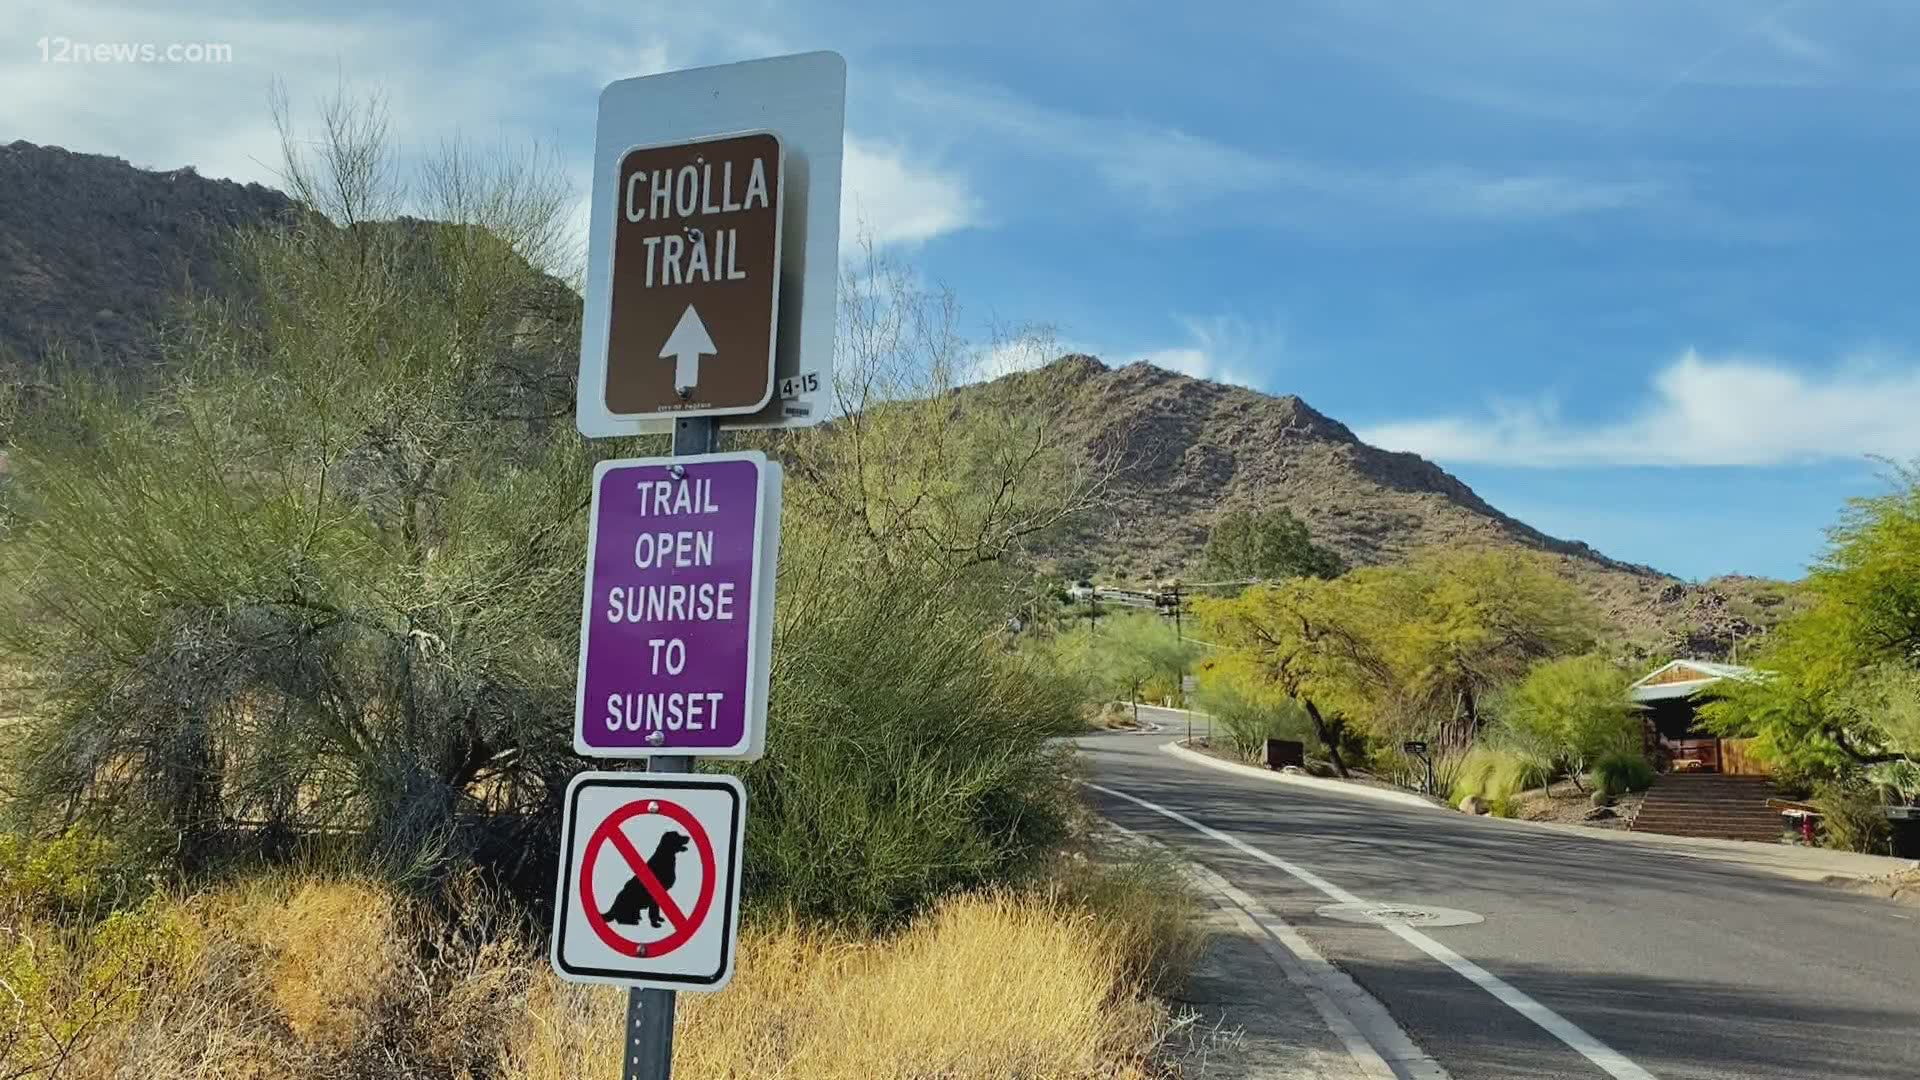 Following a closure that will end up lasting more than a year, major changes are coming to Camelback Mountain’s Cholla Trail.